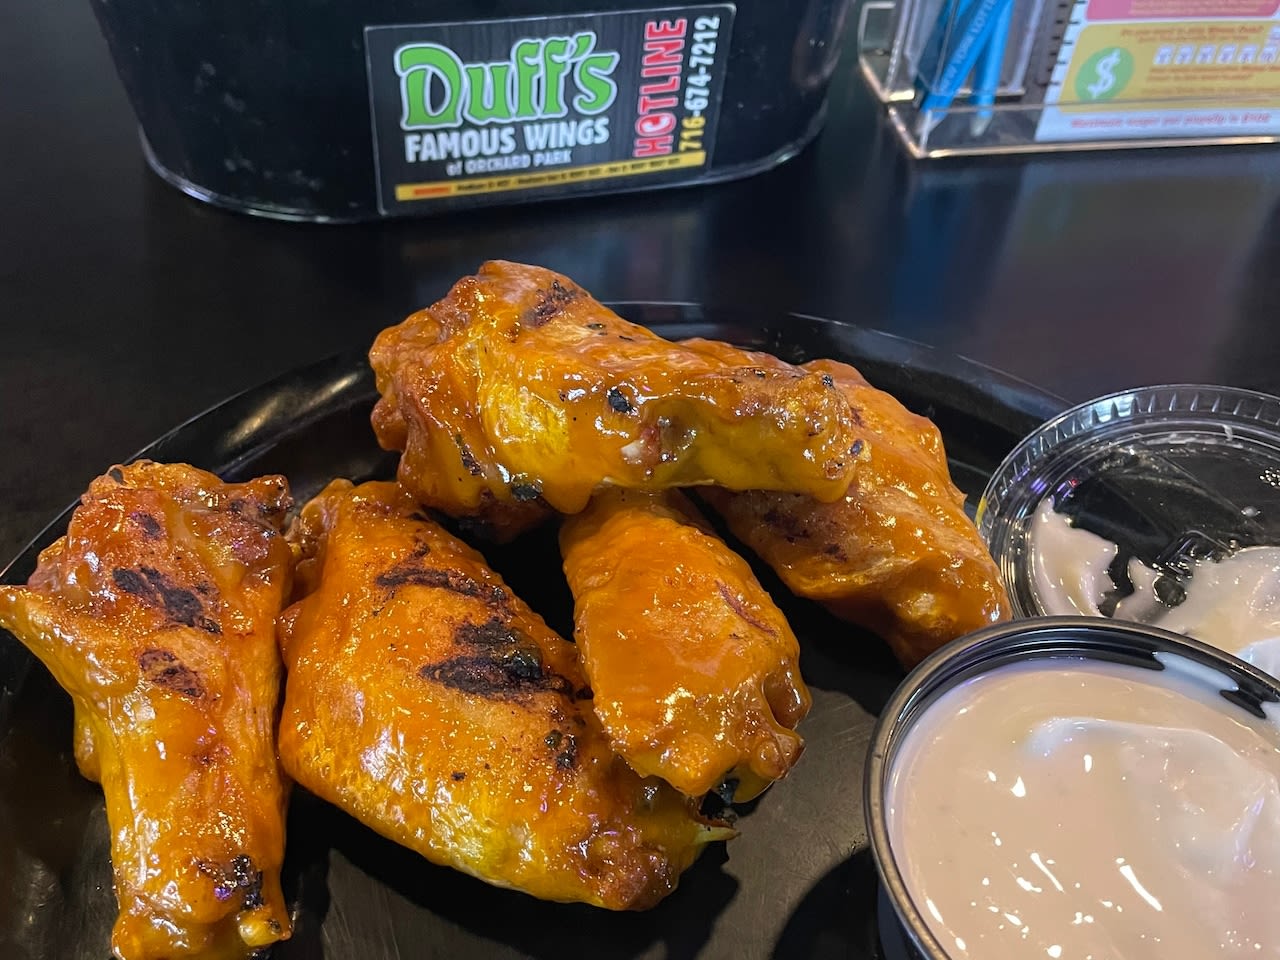 Get saucy: Buffalo Wing Trail named among best food trails in U.S.